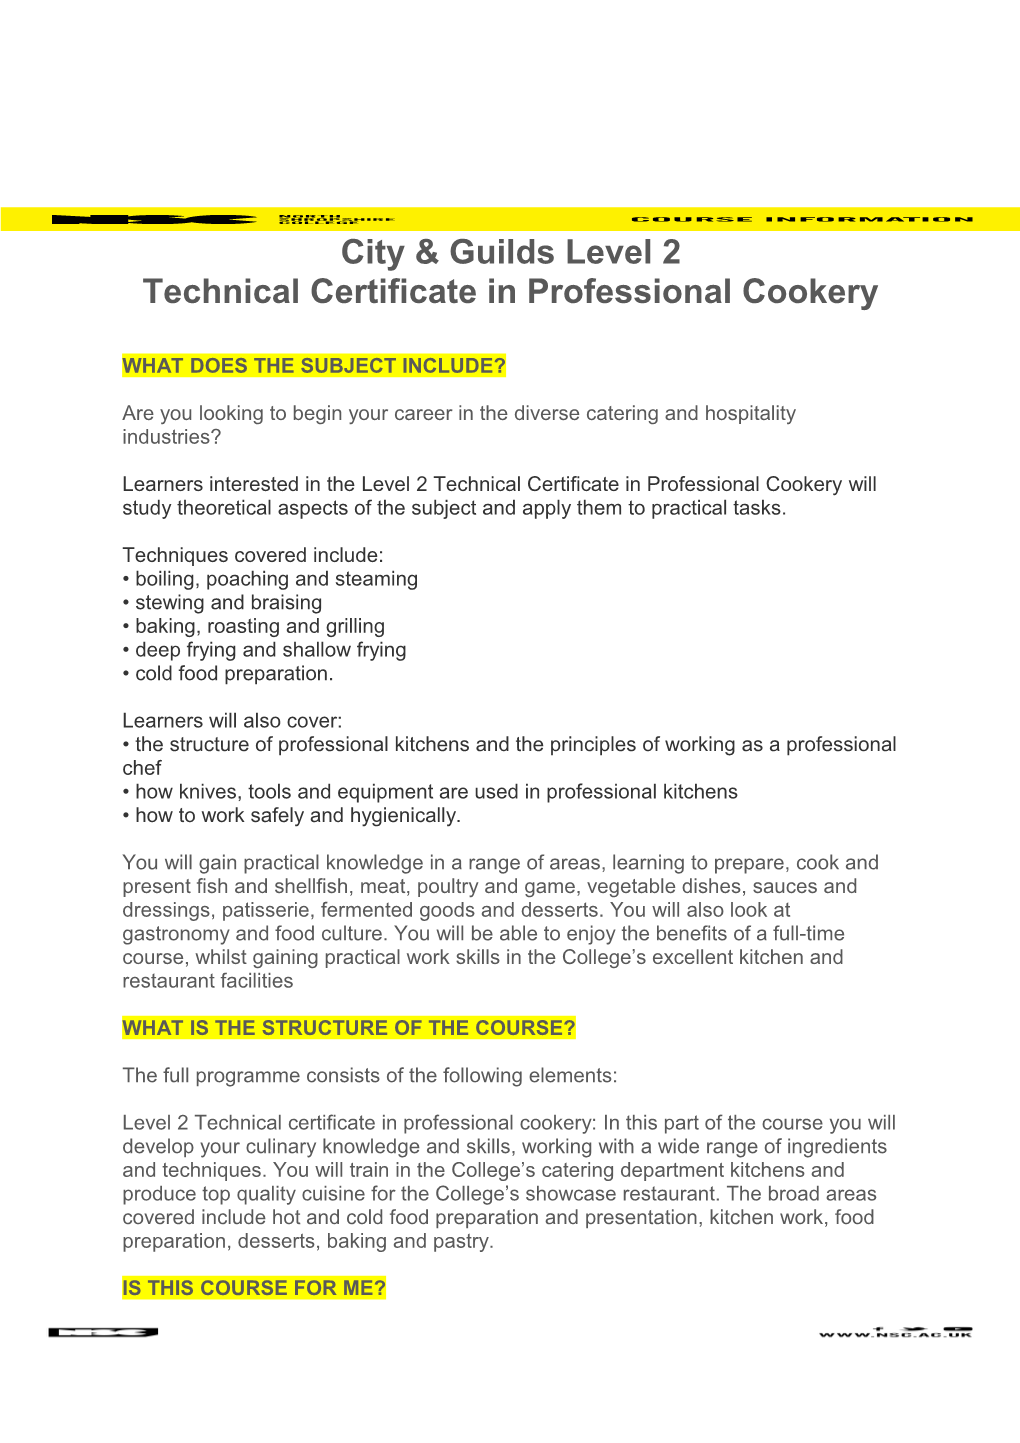 Technical Certificate in Professional Cookery